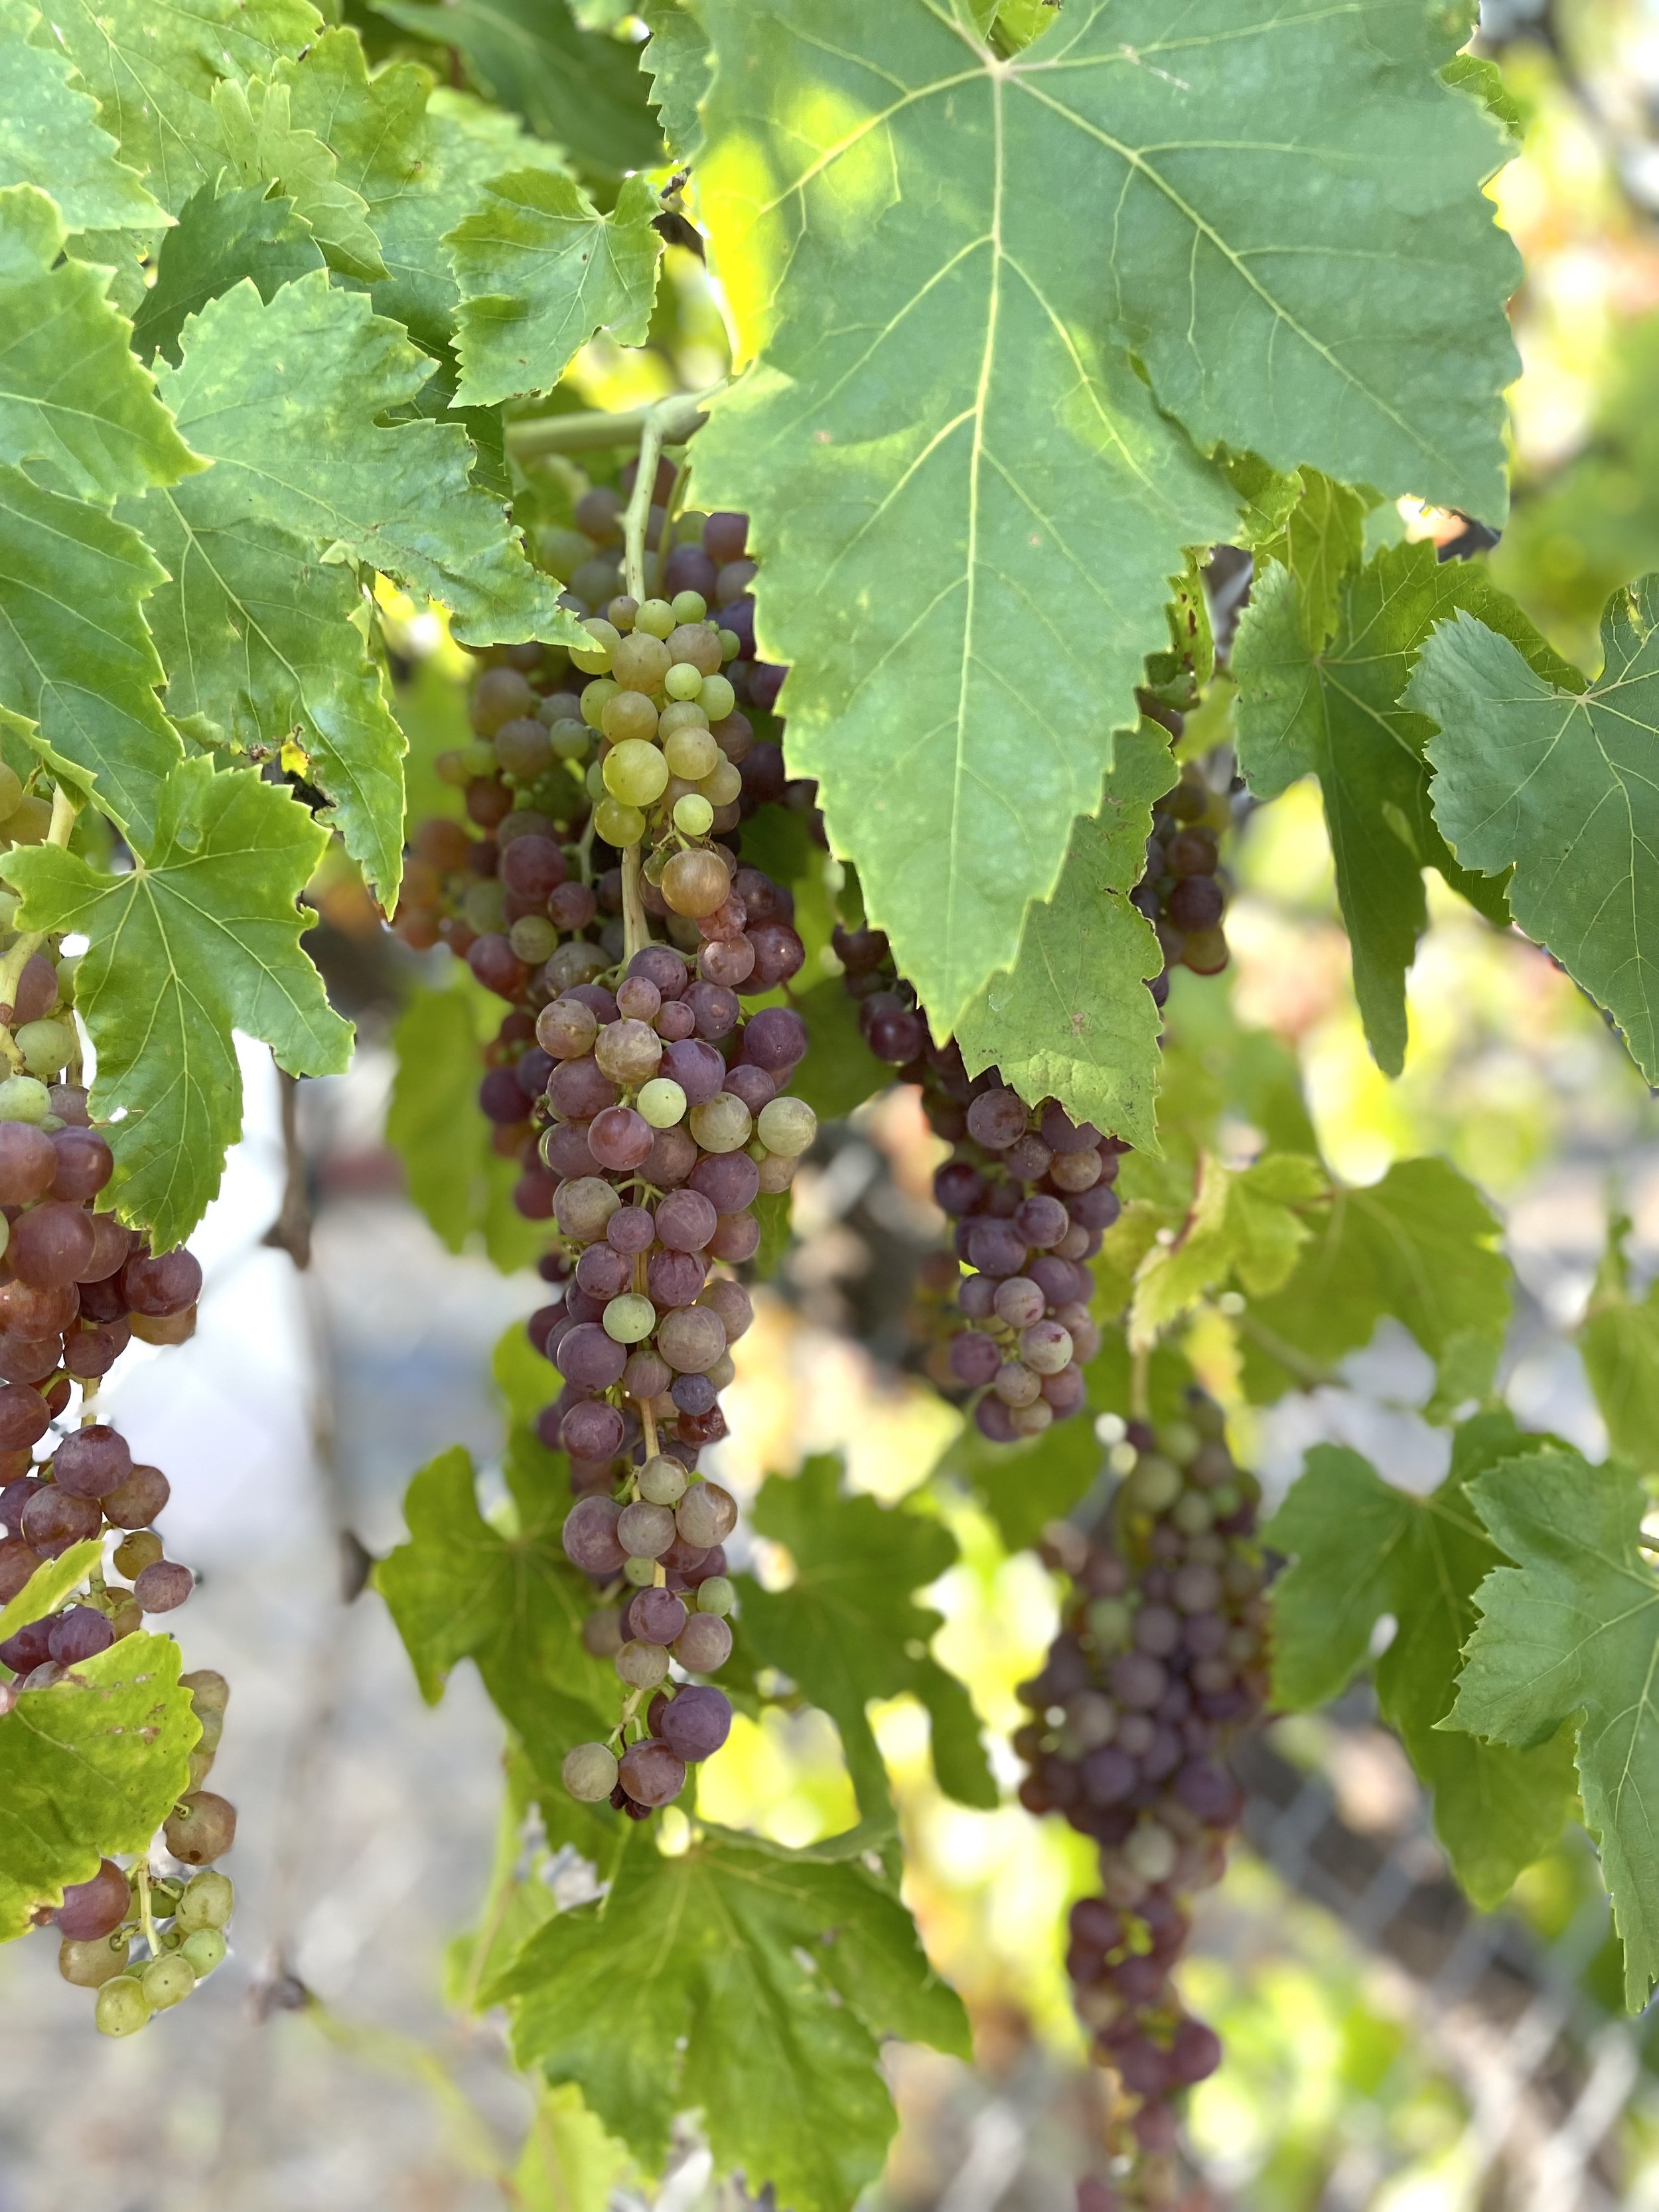 share: grapes (July 17)